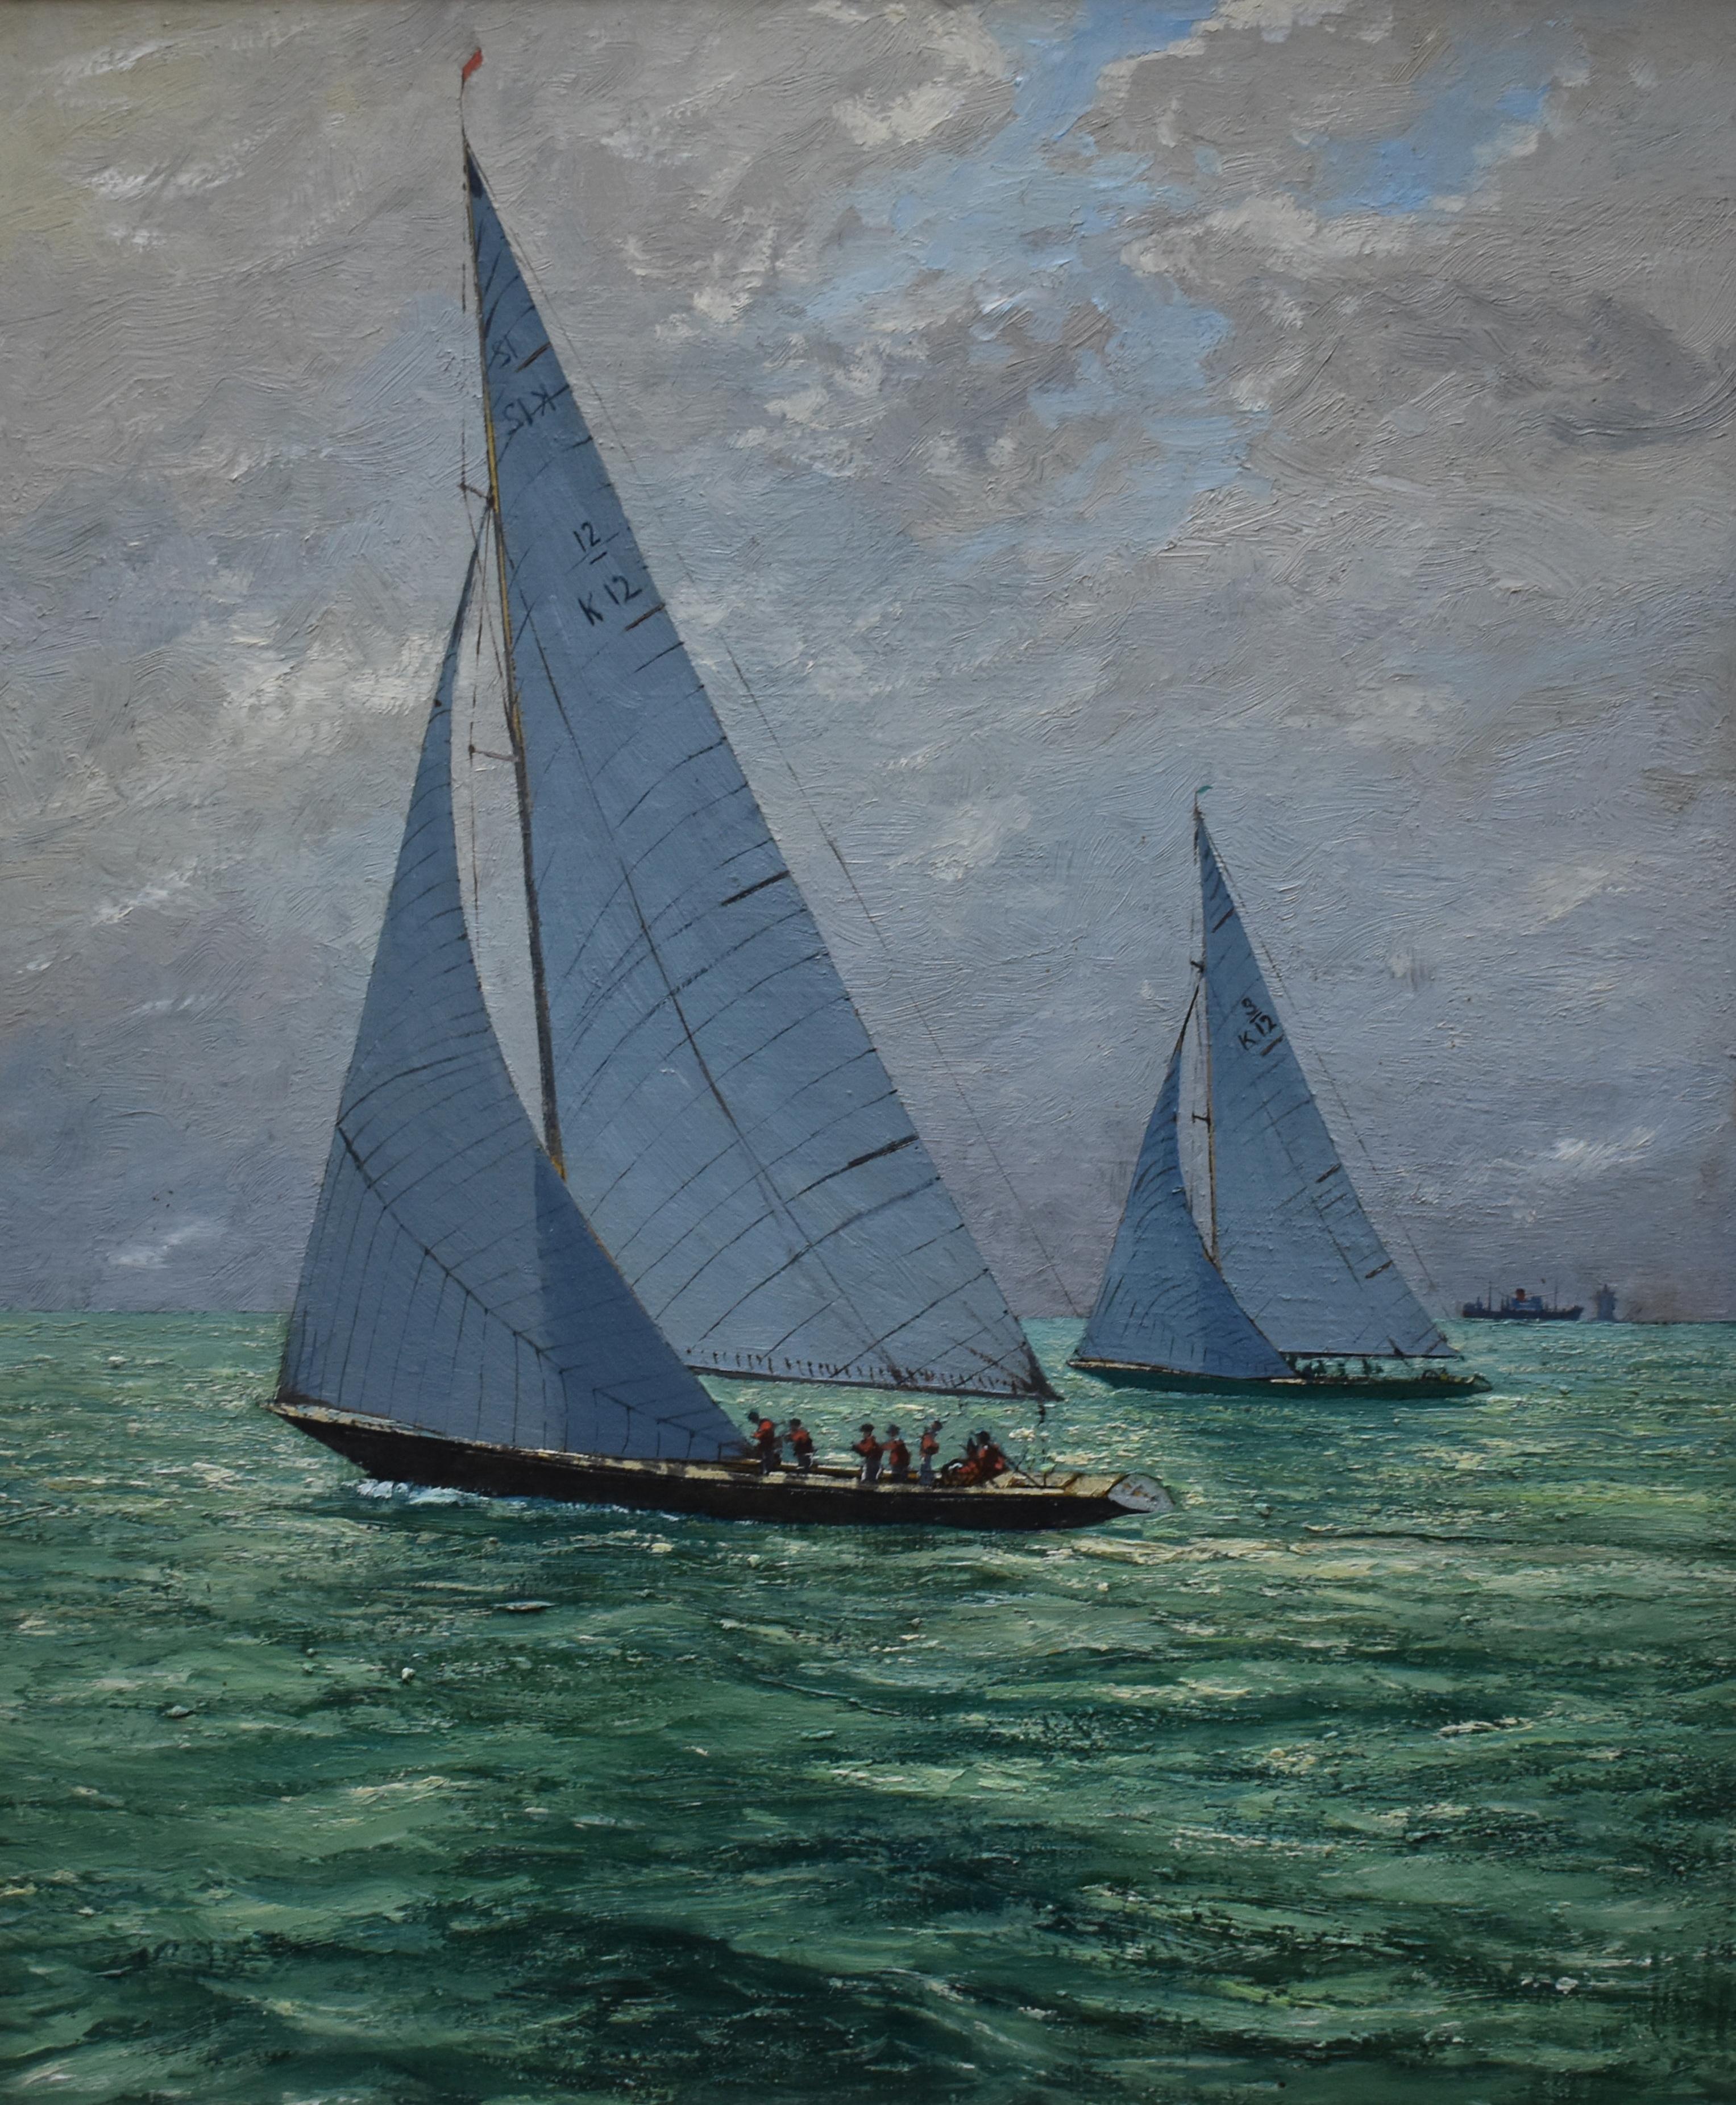 Sovereign and Kurrewa America’s Cup Interest Oil Painting - Gray Landscape Painting by Claude Muncaster